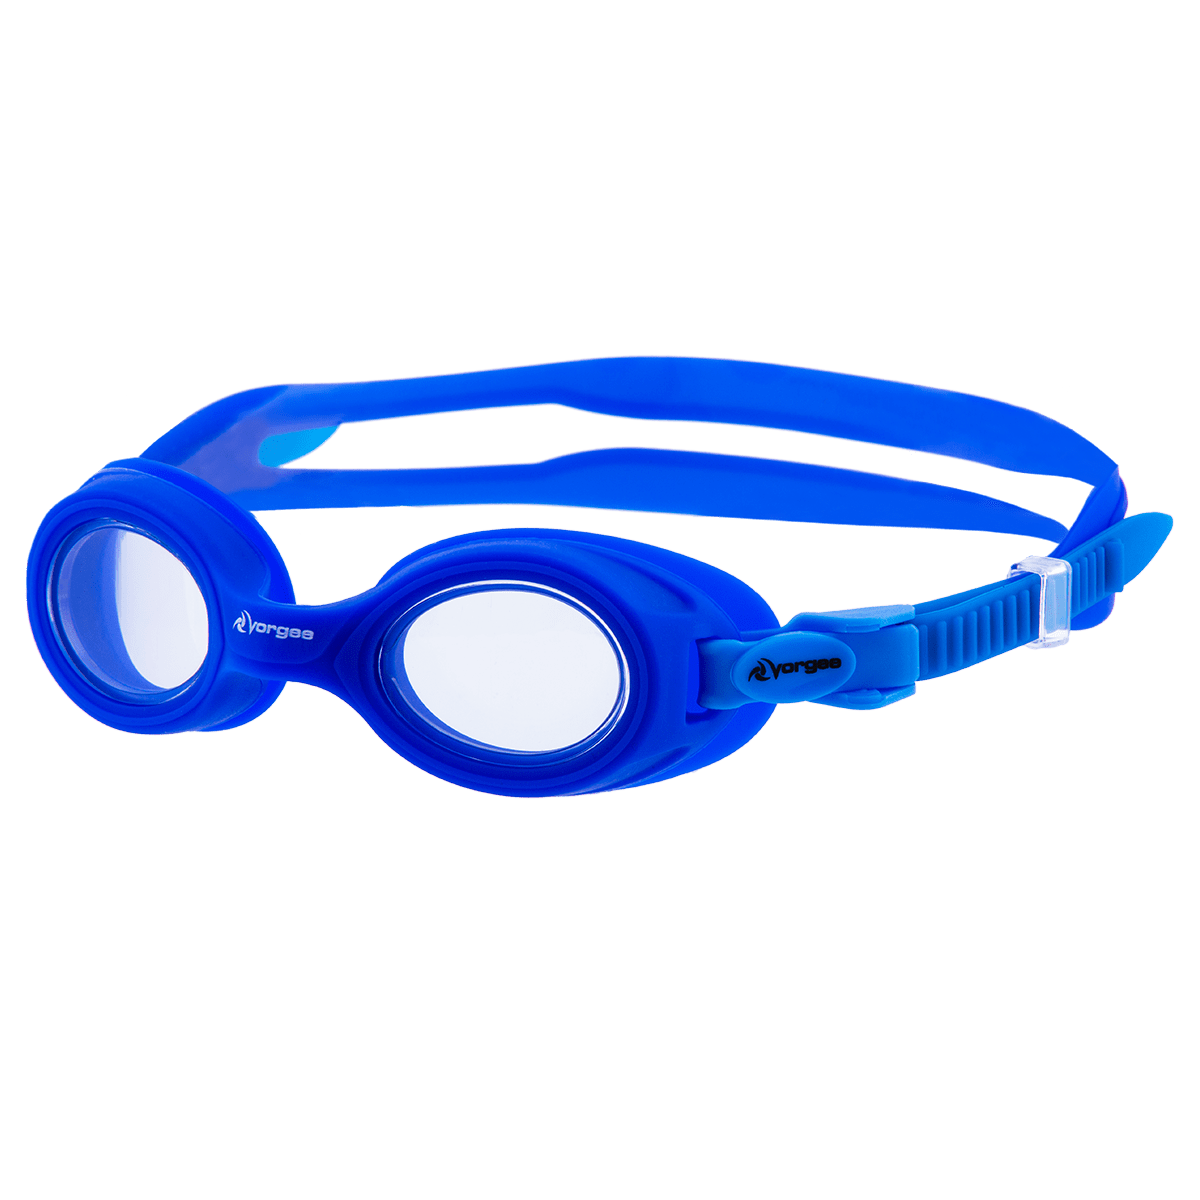 Vorgee Kids Goggle Starfish- Clear Lens -  (18 months to 3 years) by Vorgee - Ocean Junction